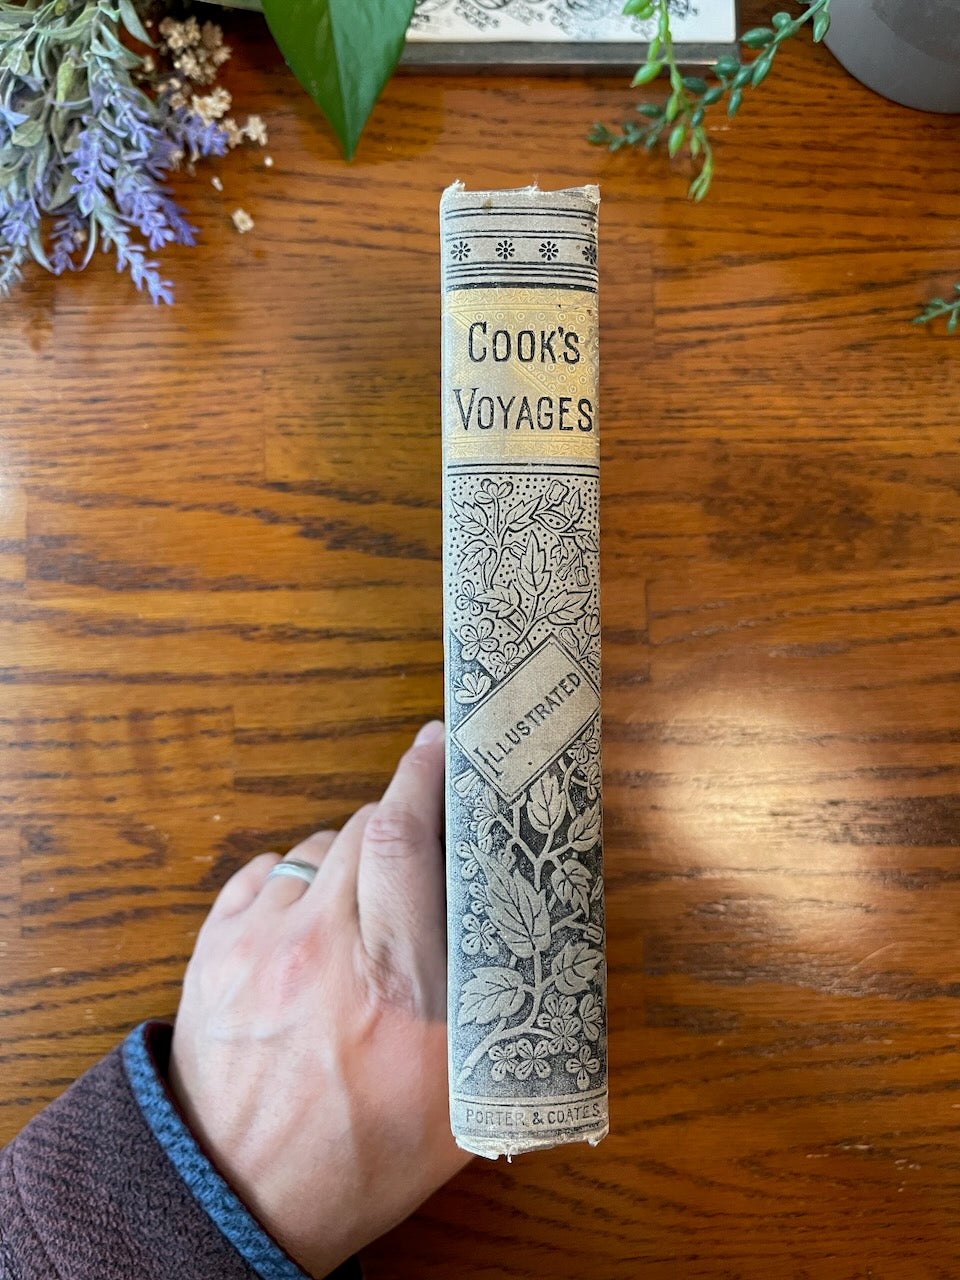 A Narrative of the Voyages Round the World by Capt James Cook / ca. 1880 - Precious Cache